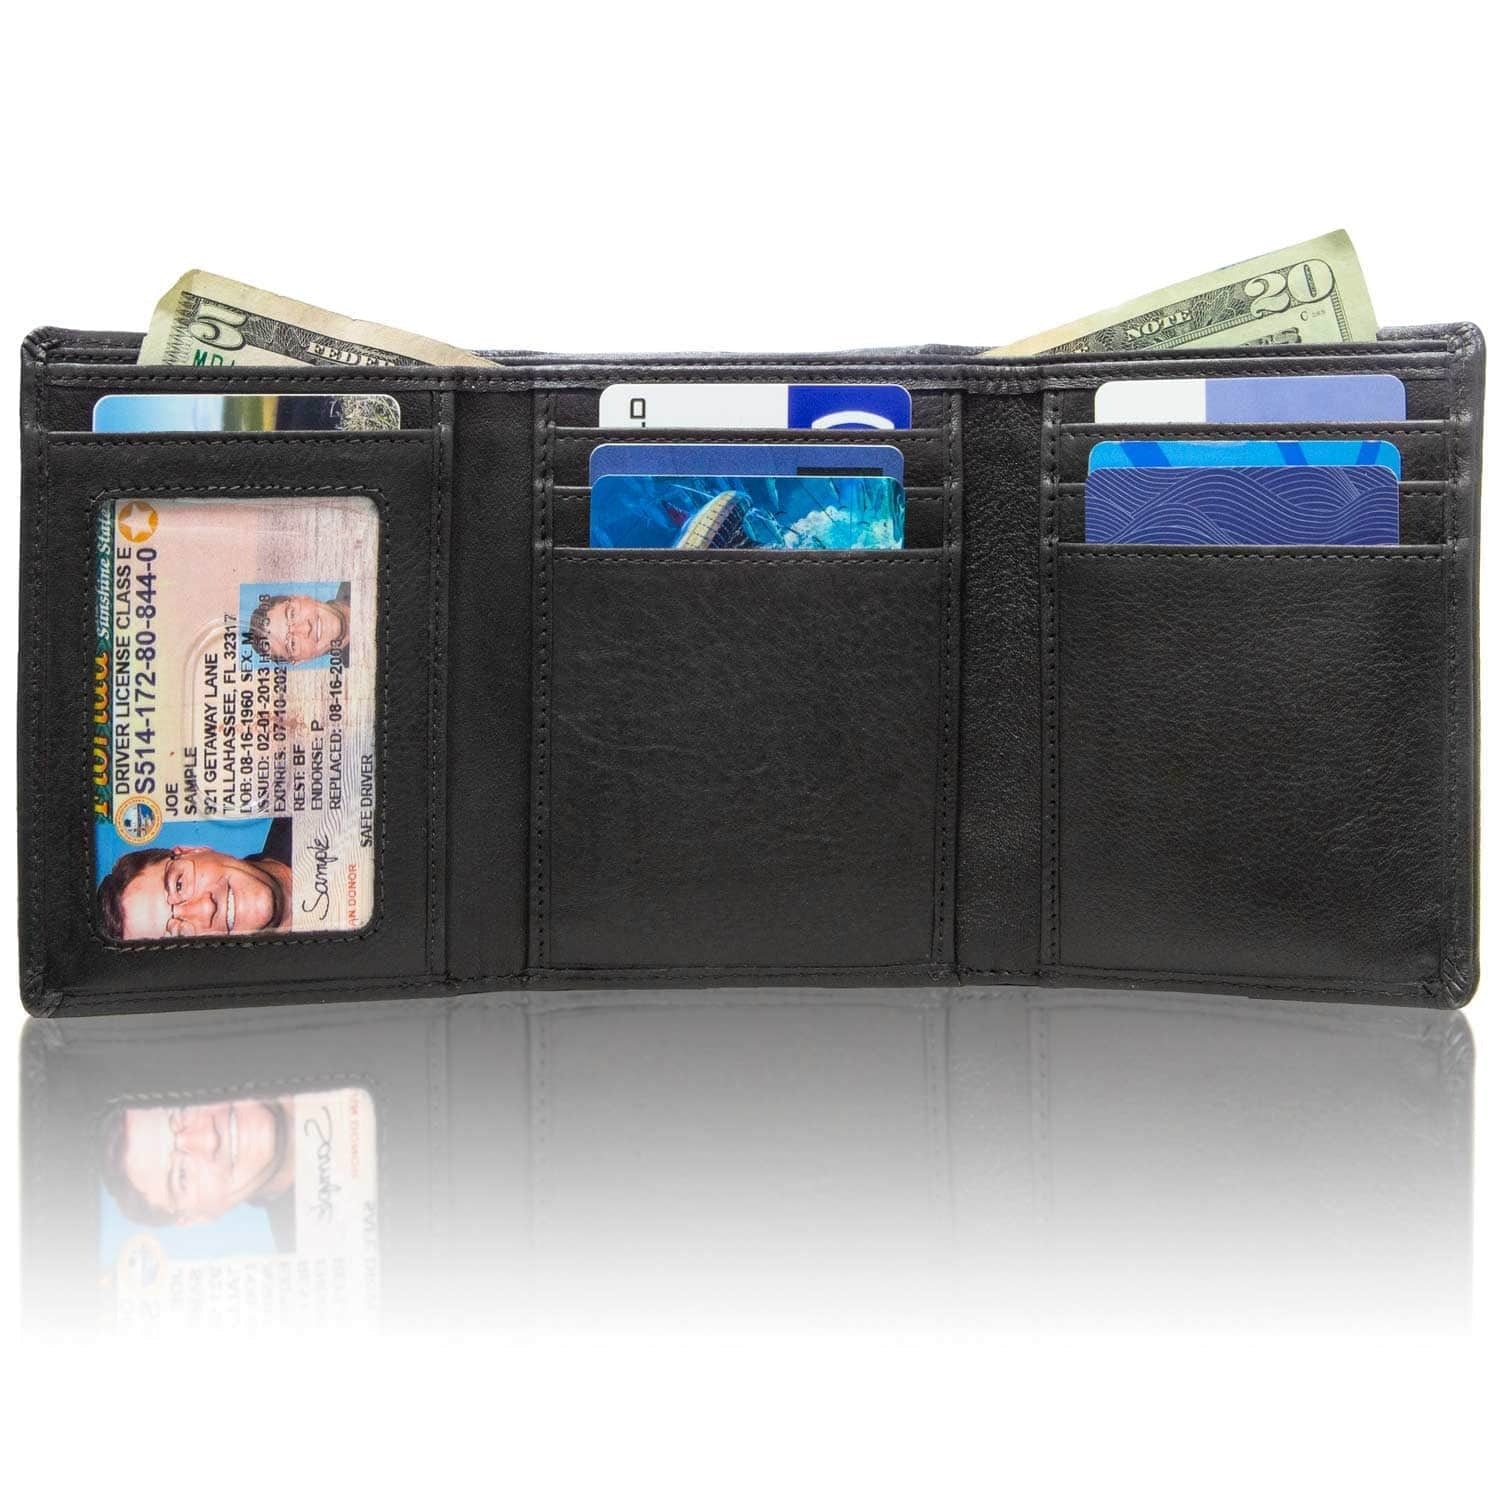 RFID PASSPORT POUCH – SIDE BY SIDE